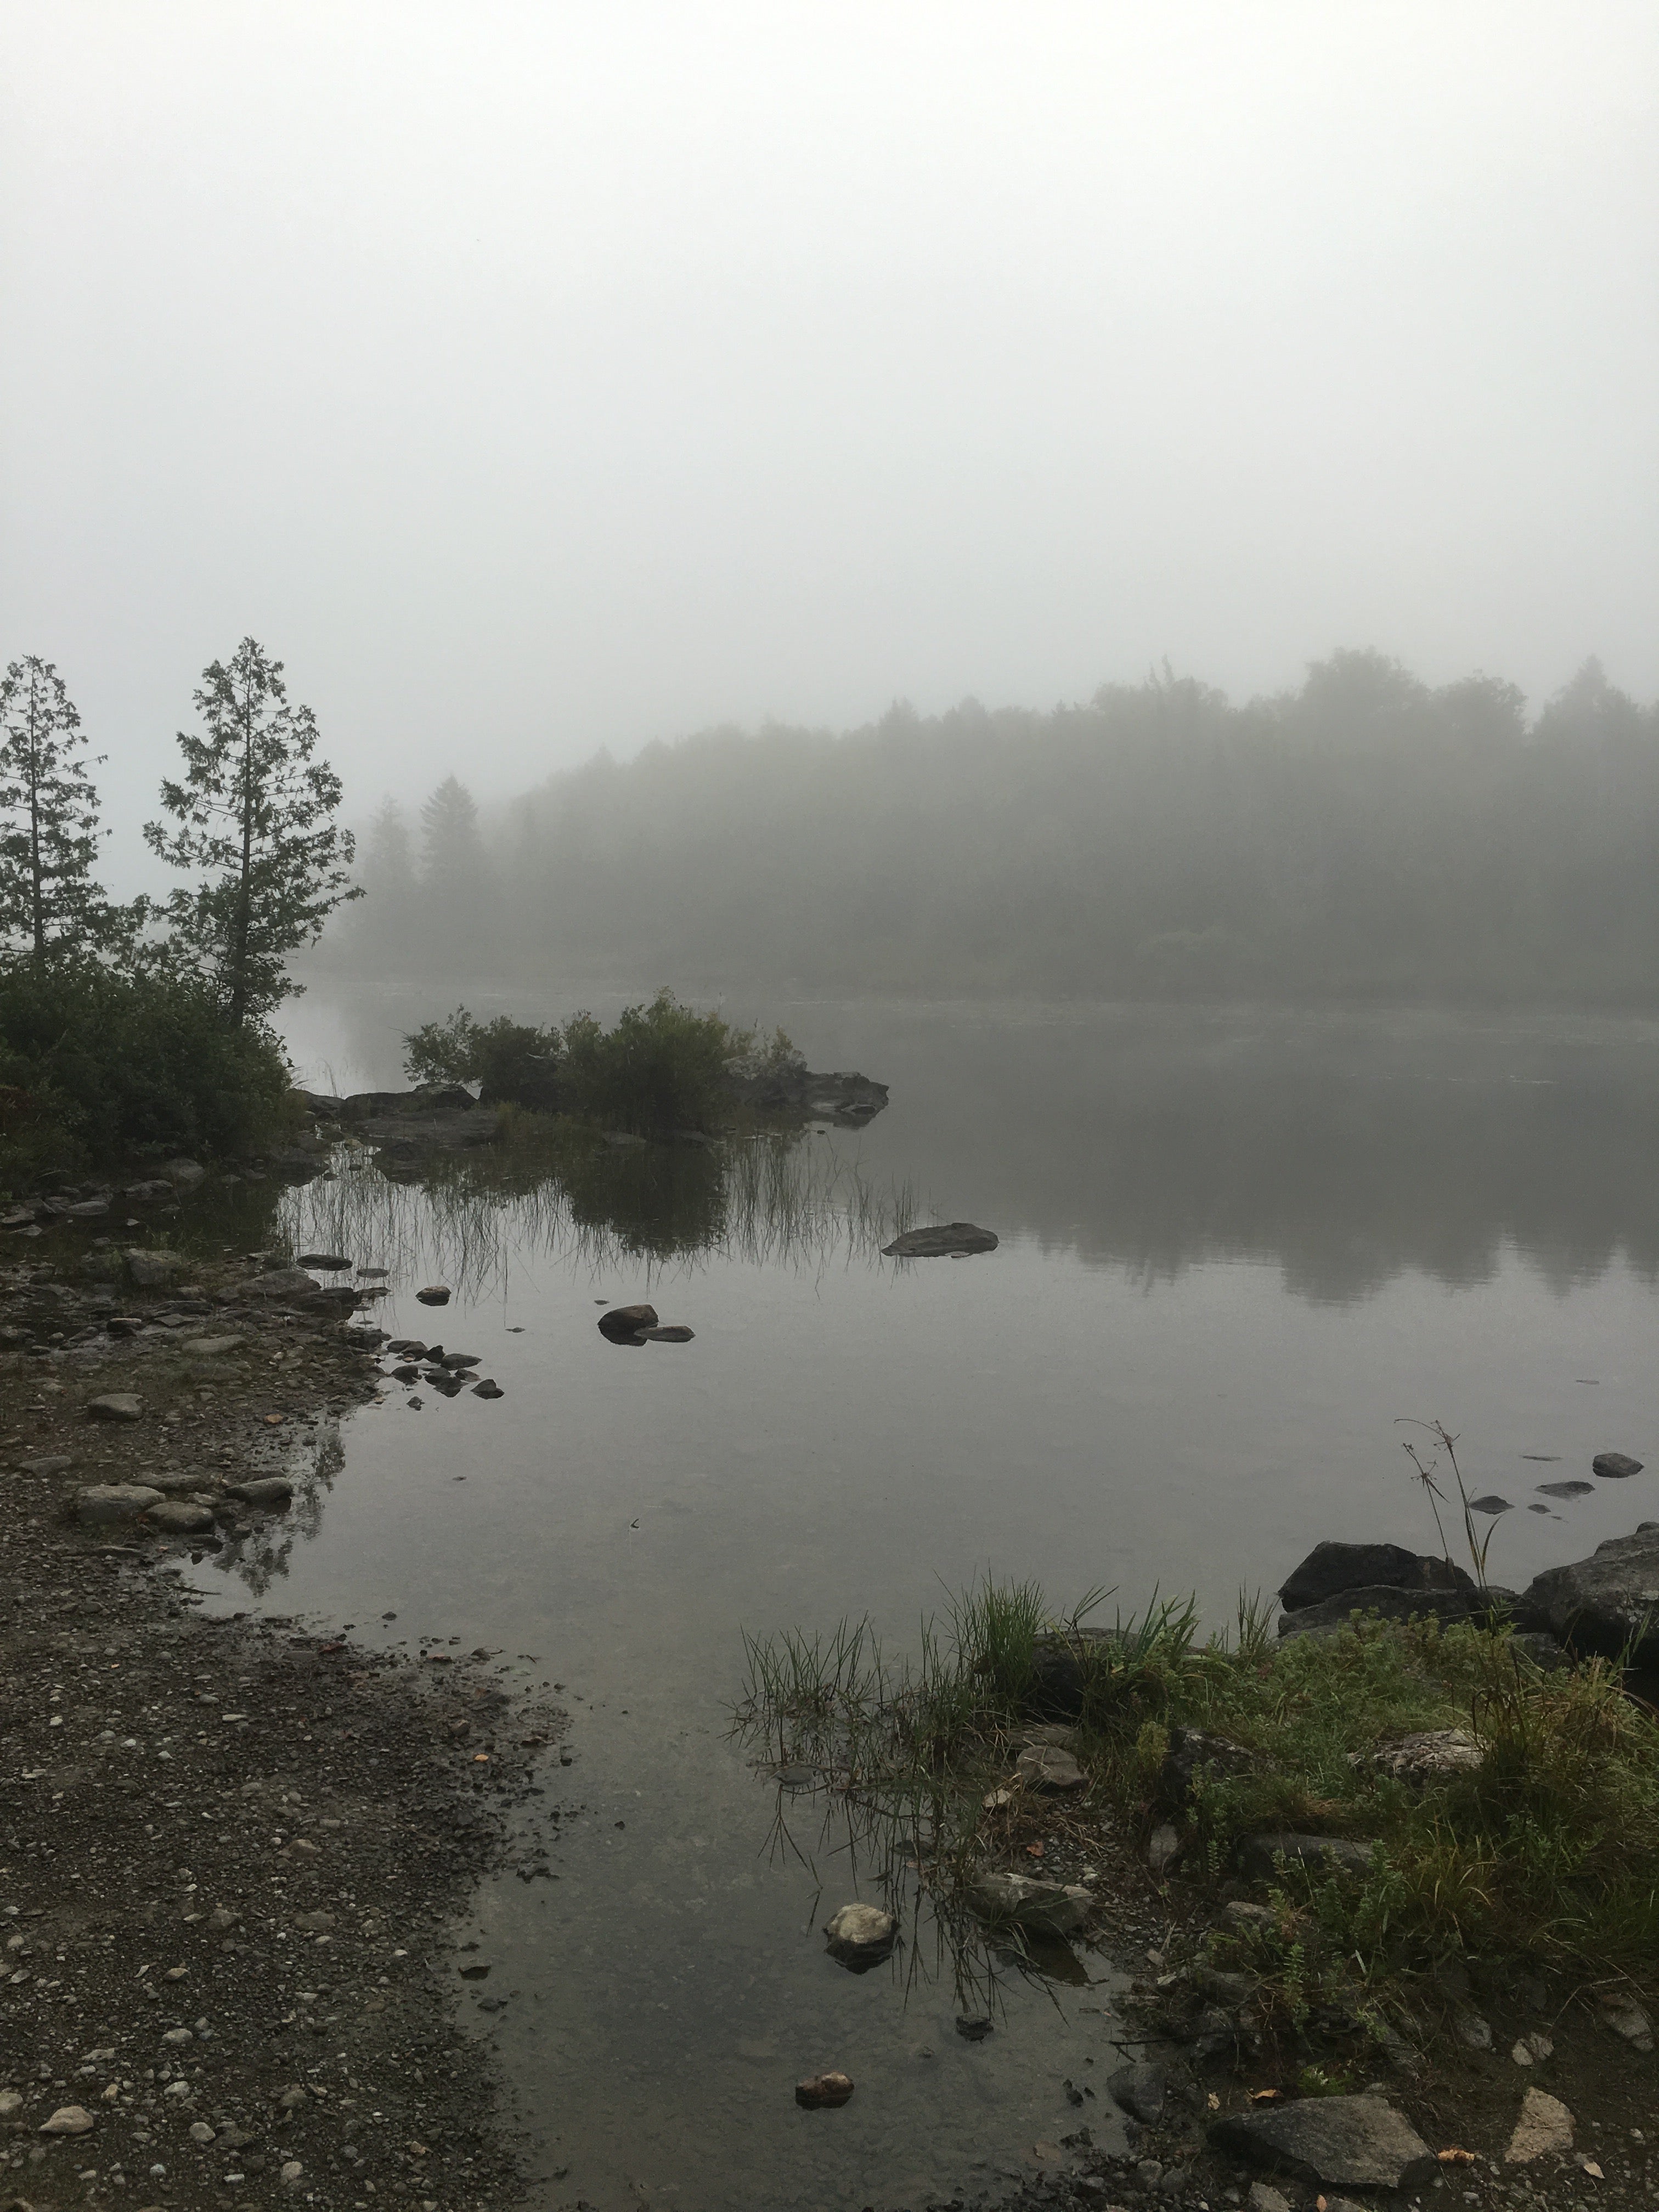 Lower Shin Pond in early morning fog